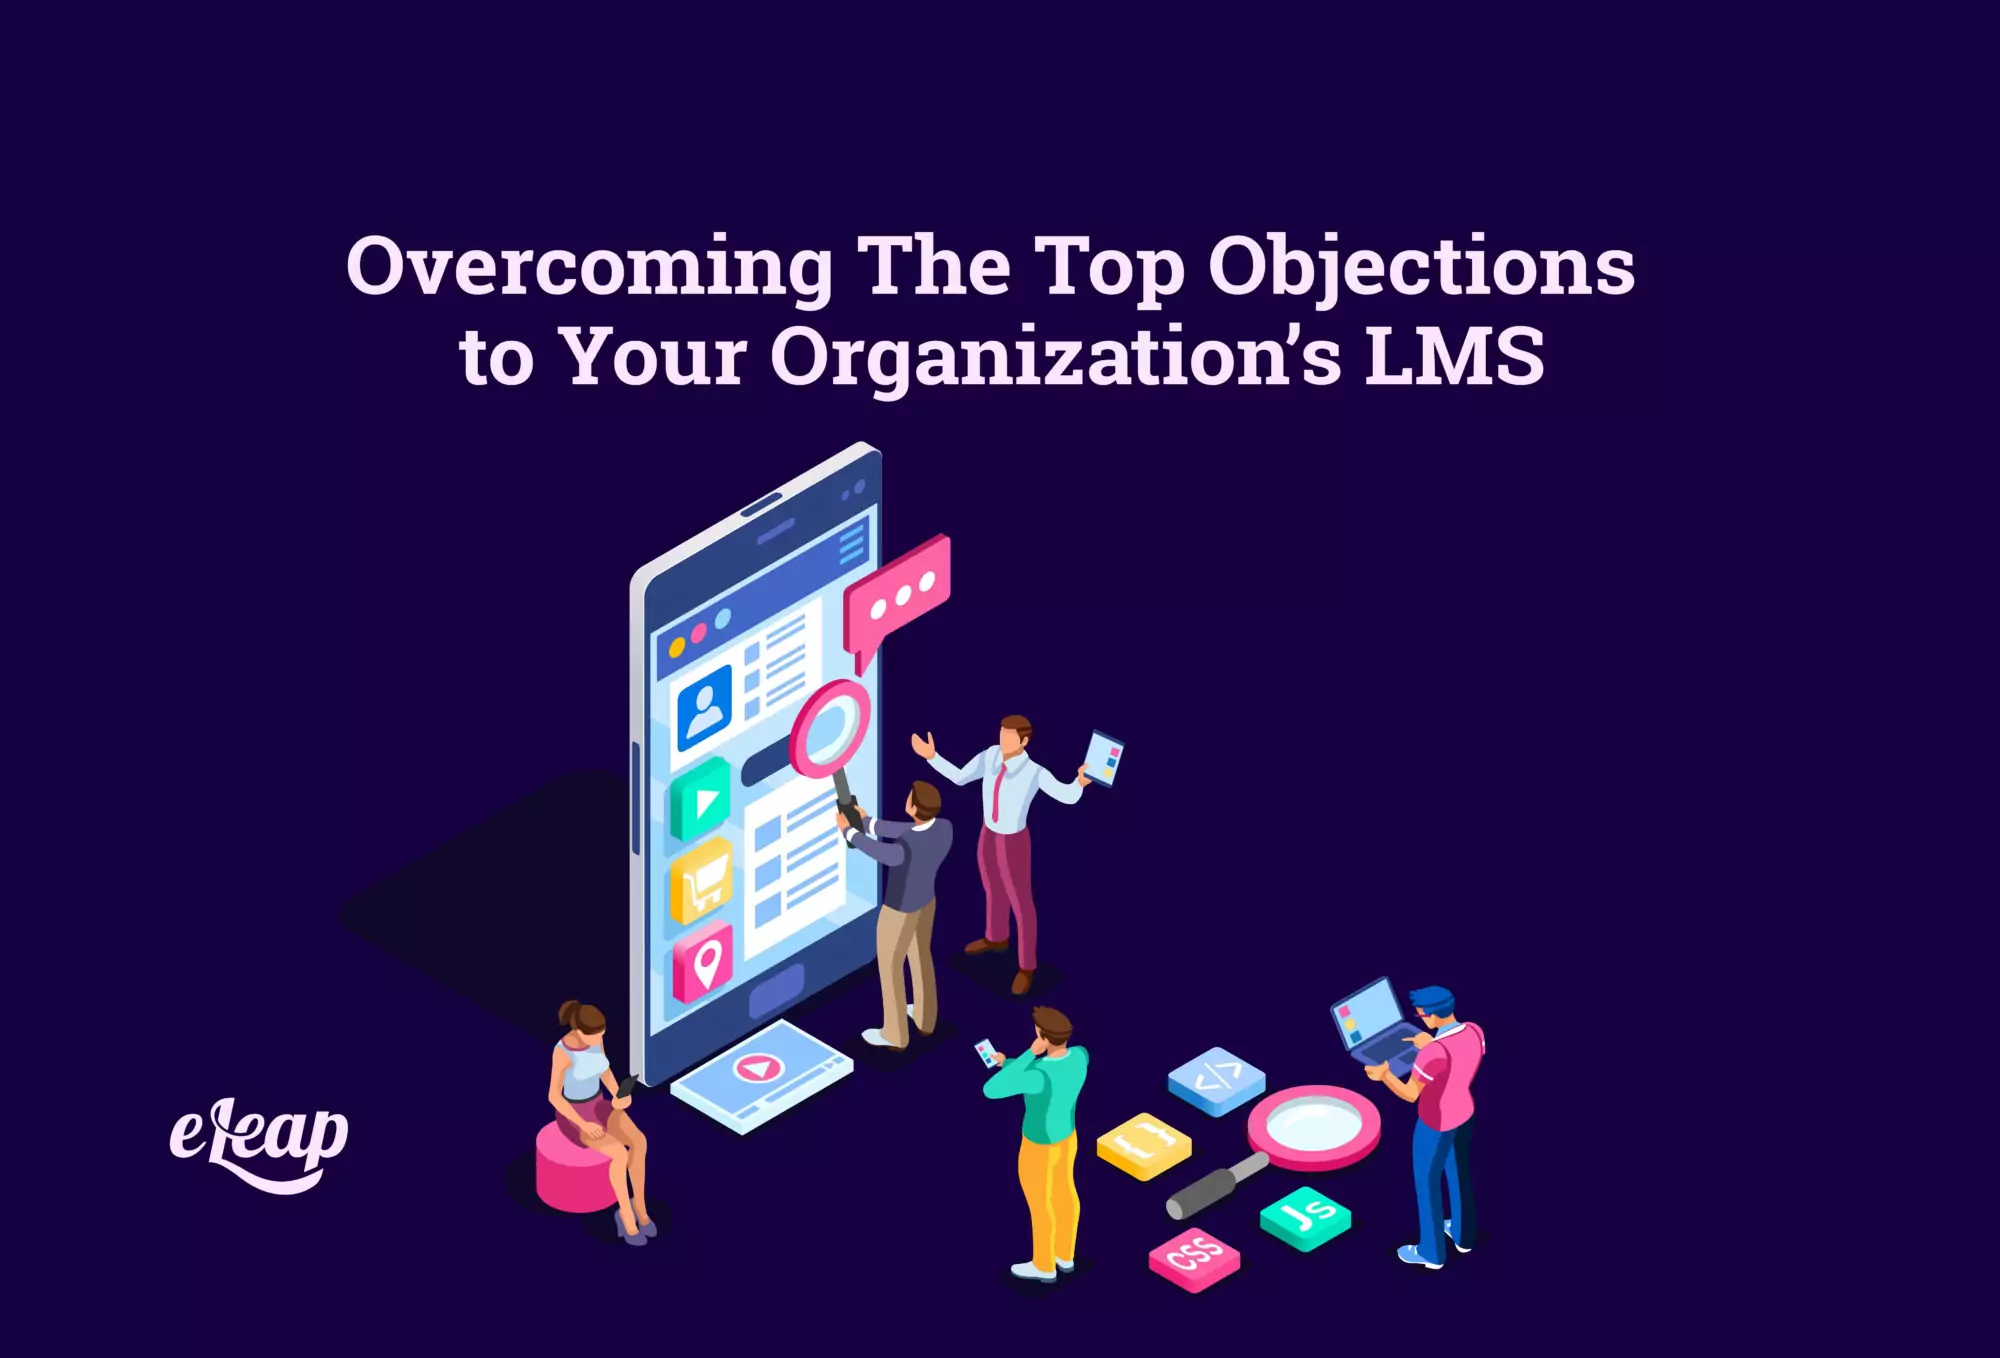 Overcoming The Top Objections to Your Organization’s LMS